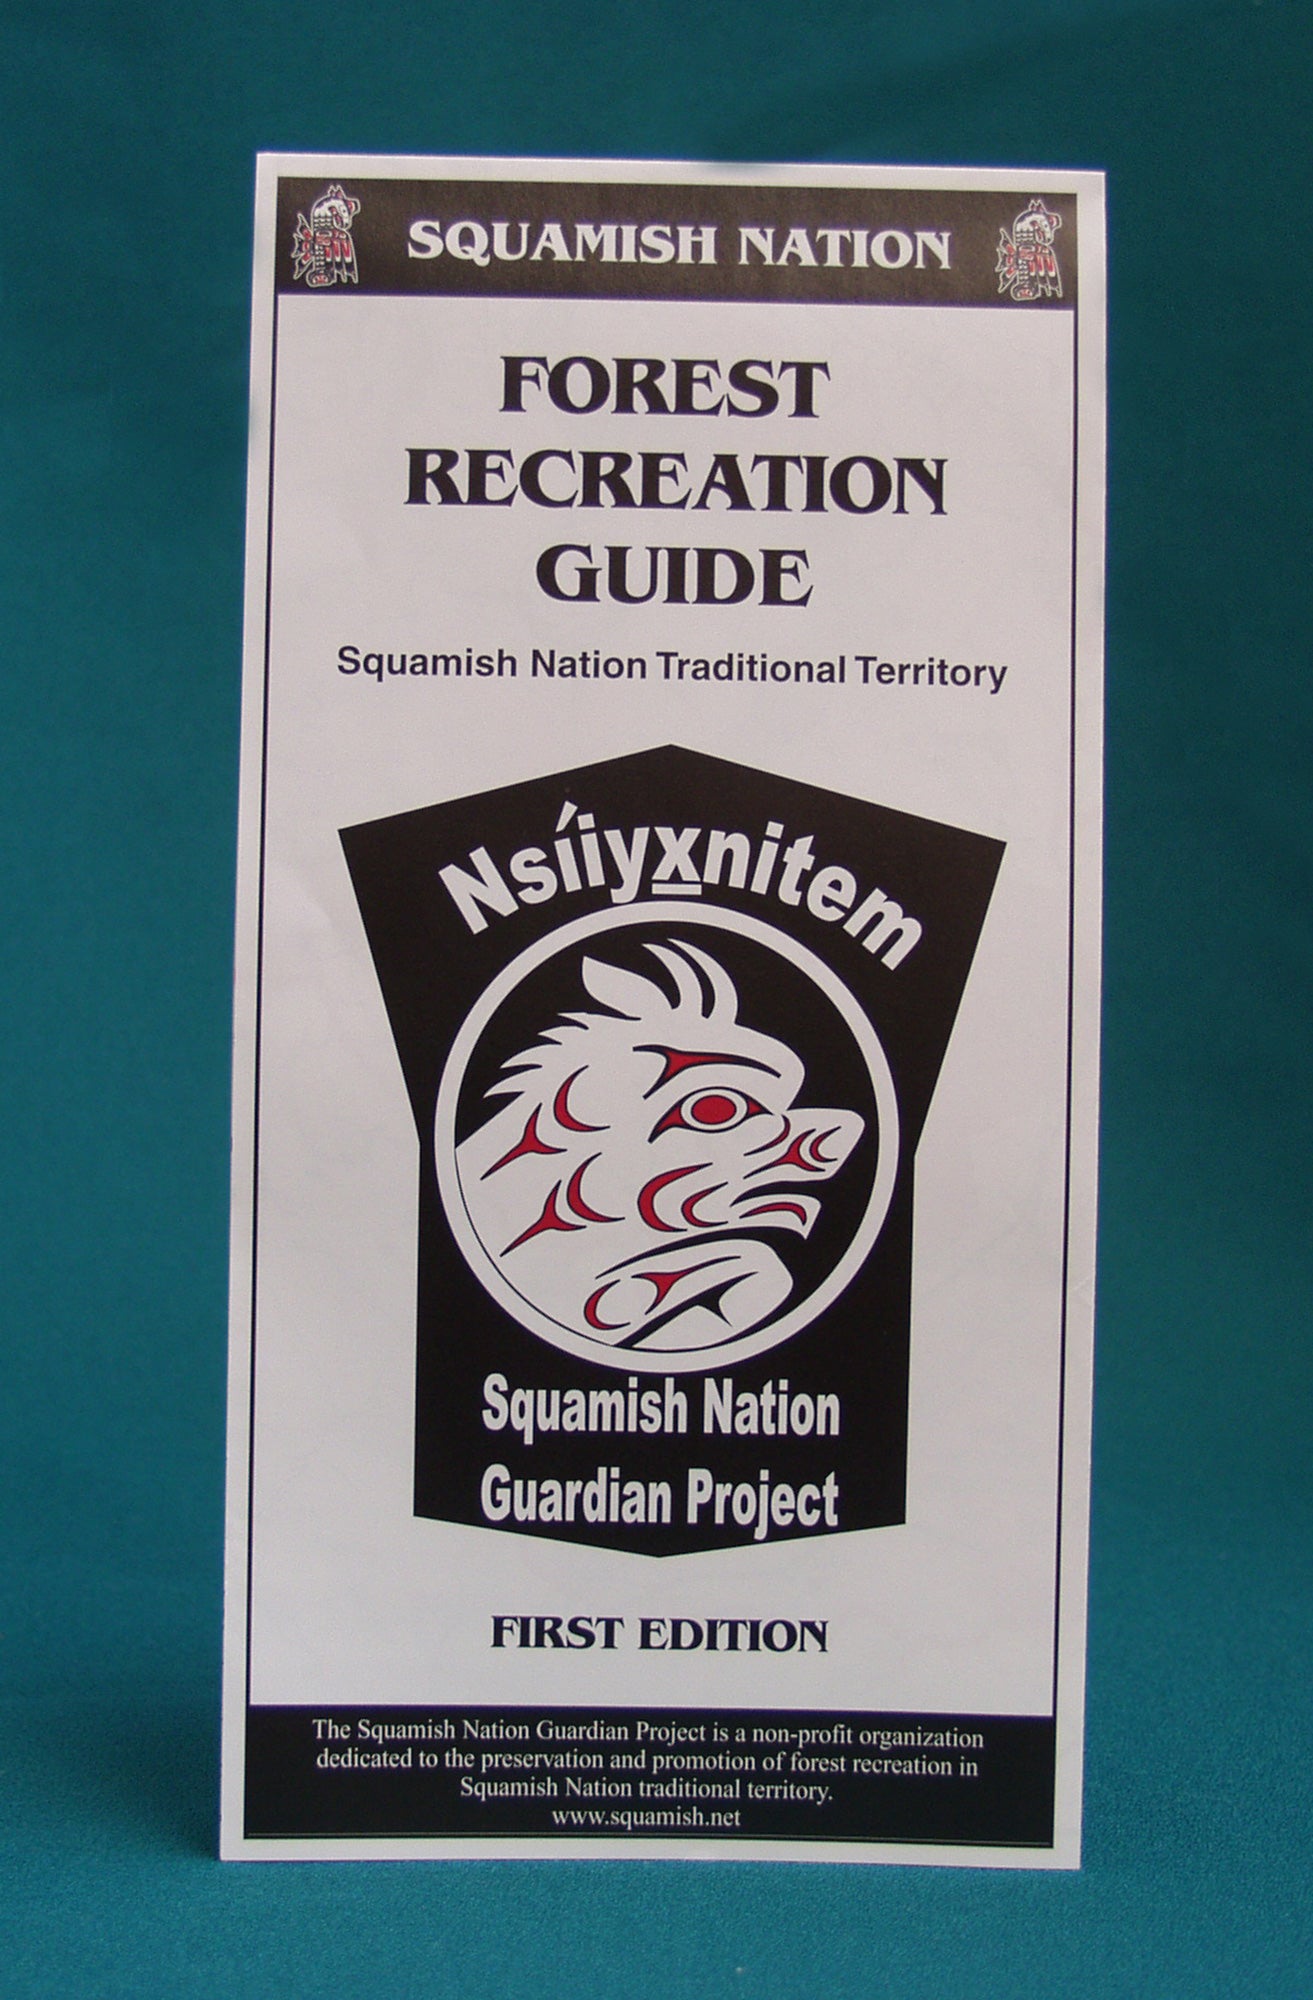 A pamphlet that says "Squamish Nation. Forest Recreation Guide. Squamish Nation Traditional Territory. Squamish Nation guardian project. First edition." End of image description. 